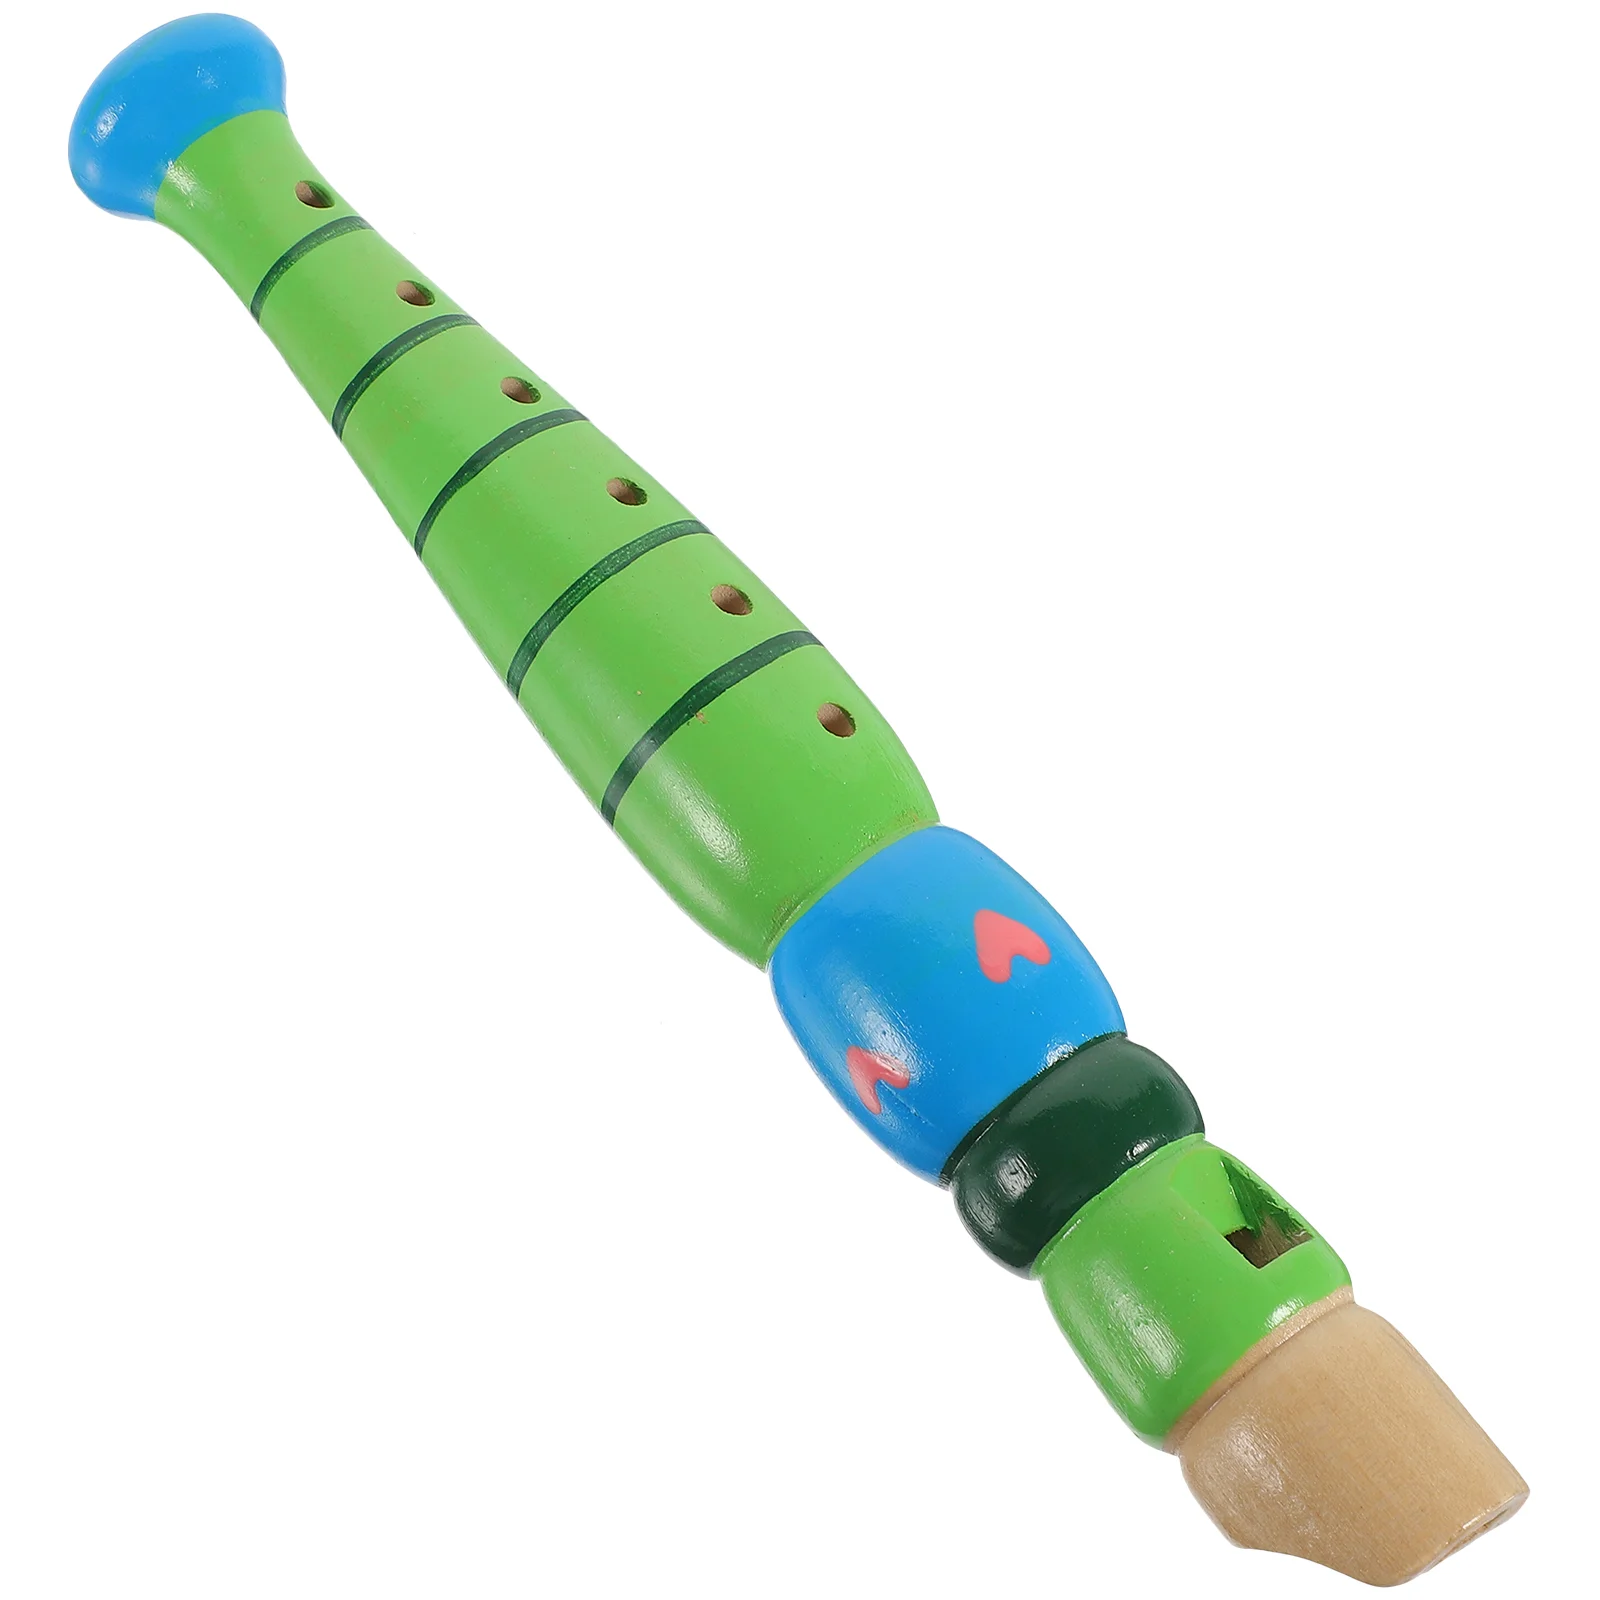 6-Hole Wooden Children Flute Beginner Descant Playing Wind Instruments Toys Early Education Enlightenment Send Random education wooden beaded clip beads block children baby training concentration threading game montessori early enlightenment toys